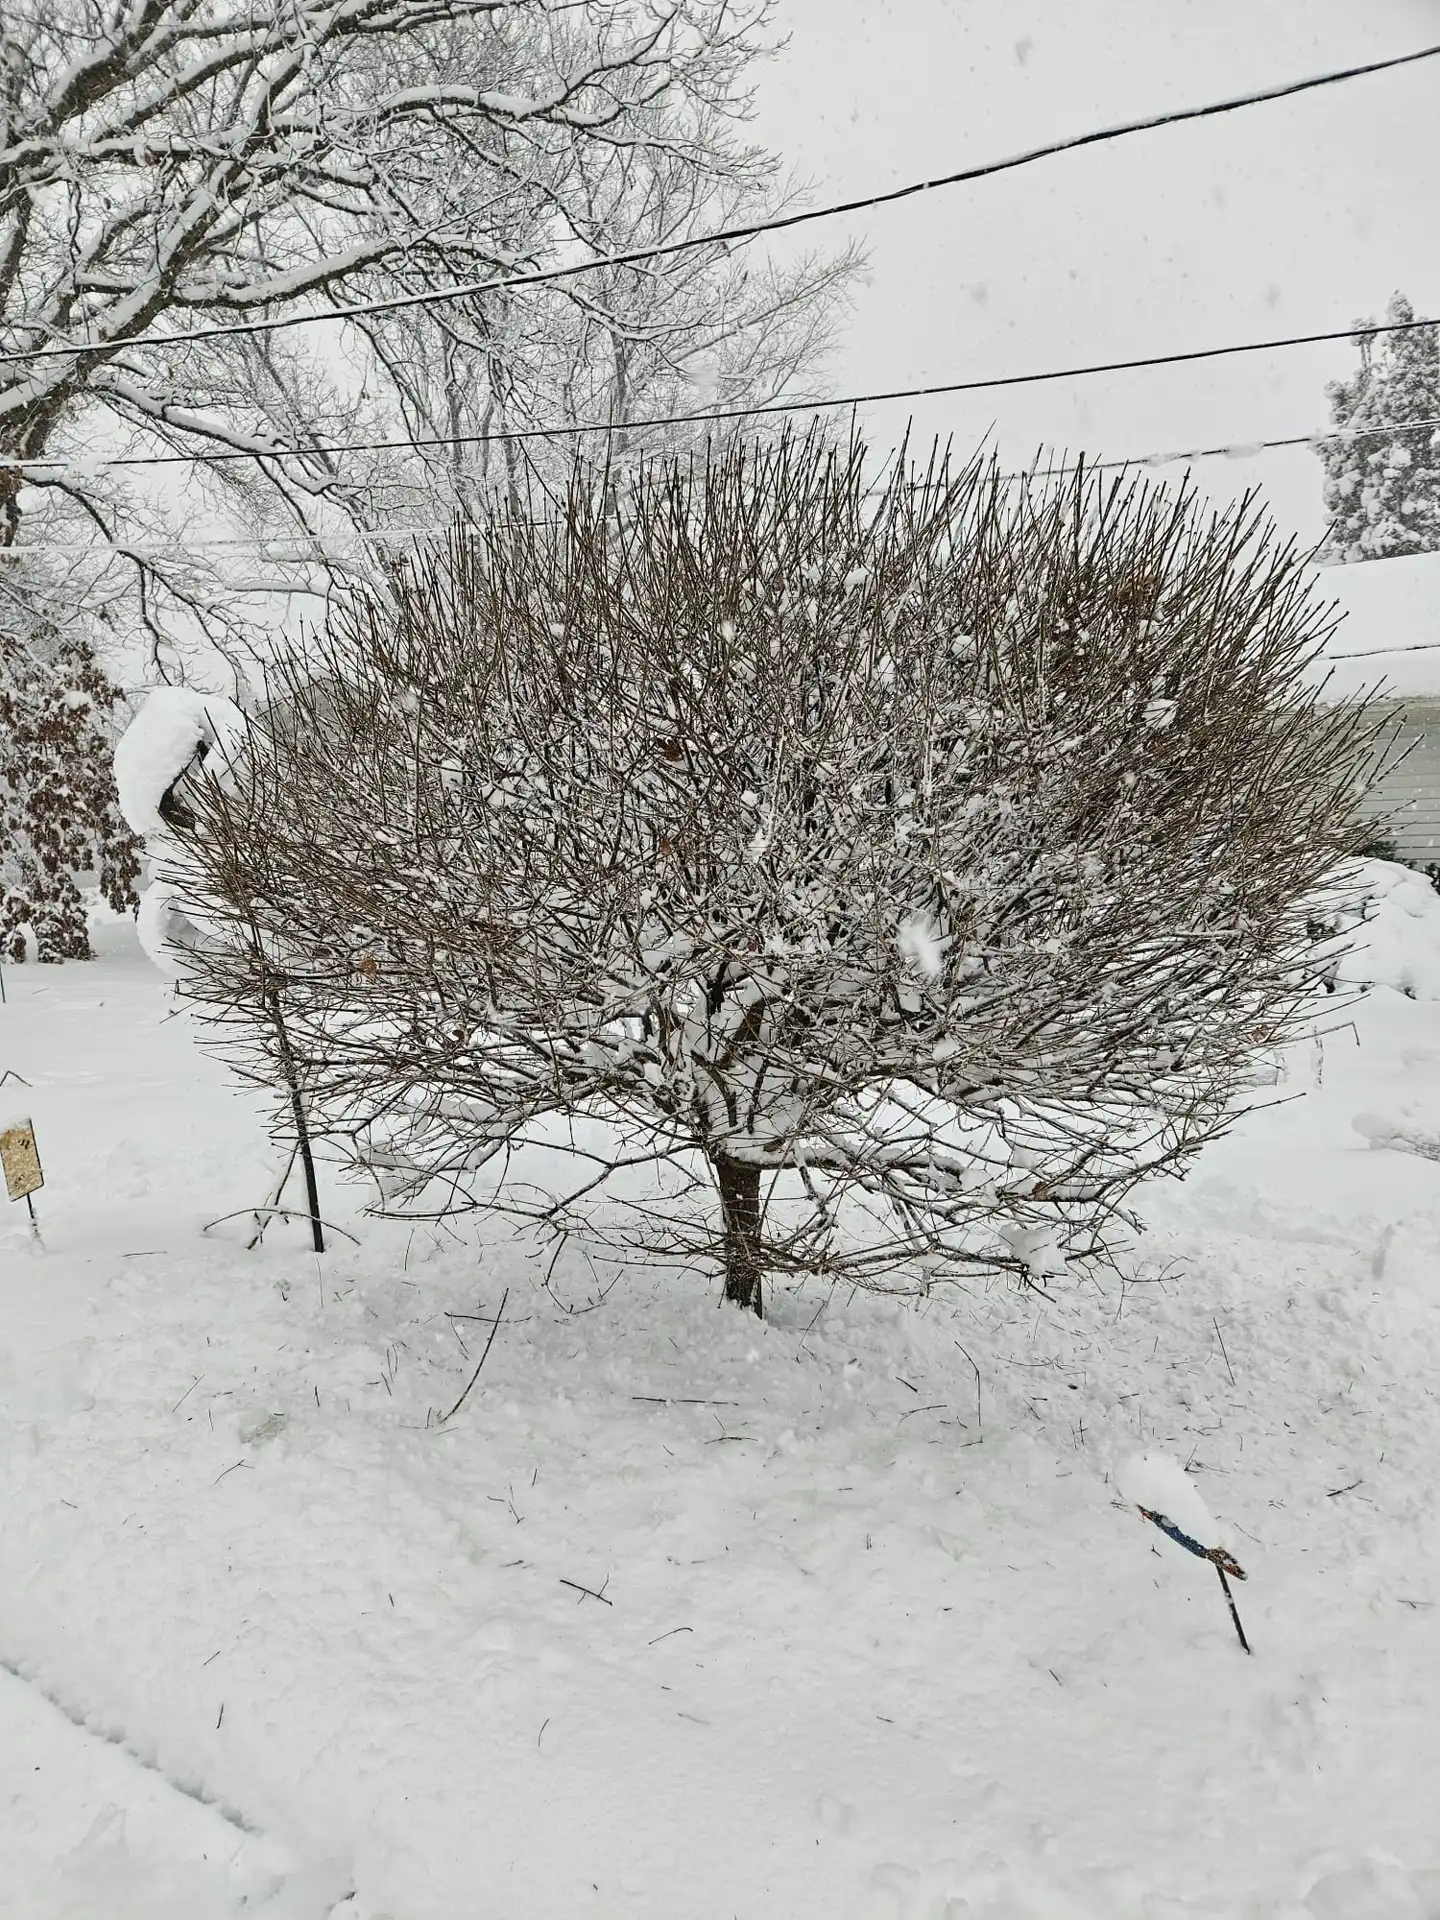 A leafless tree stands centered amid a snowy landscape with snow-laden branches and a white blanket covering the ground, while power lines cross the gray sky.